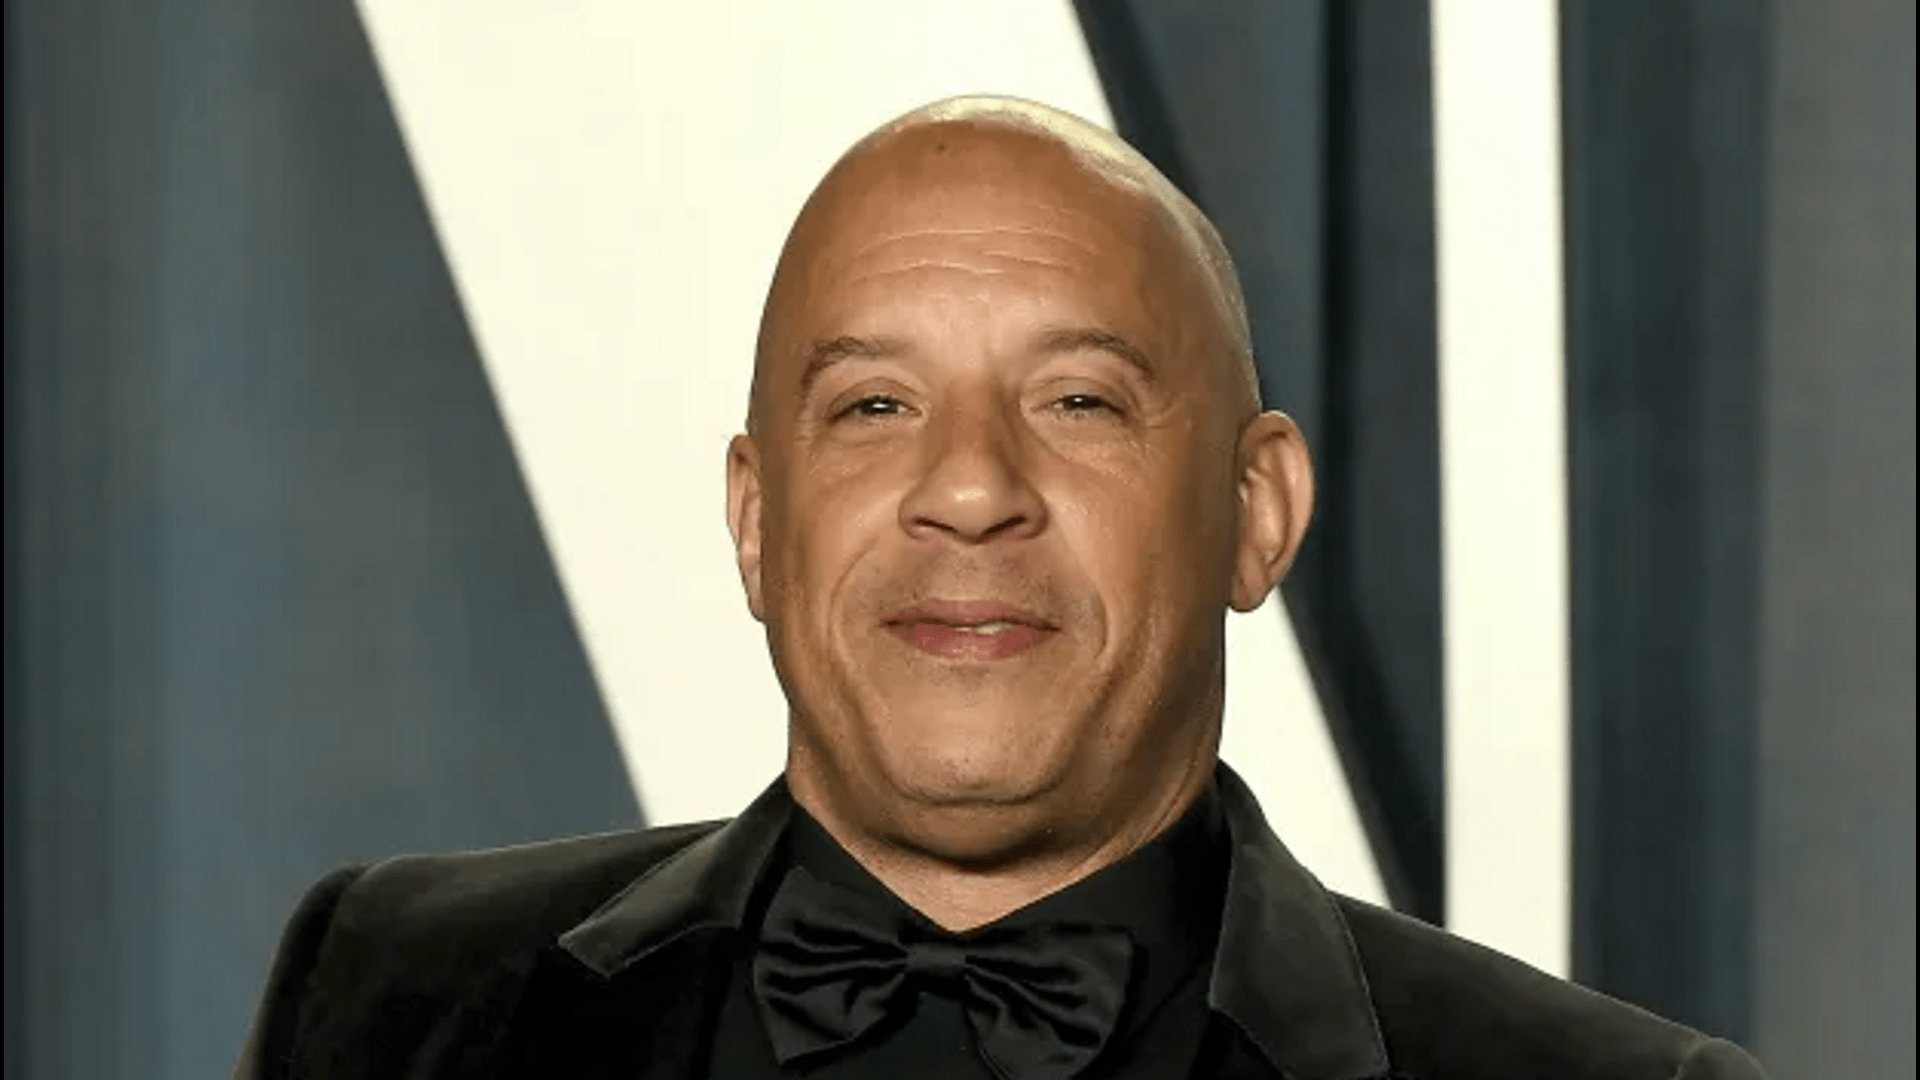 Vin Diesel revealed the name of the film "Furious 10" and announced the start of its filming